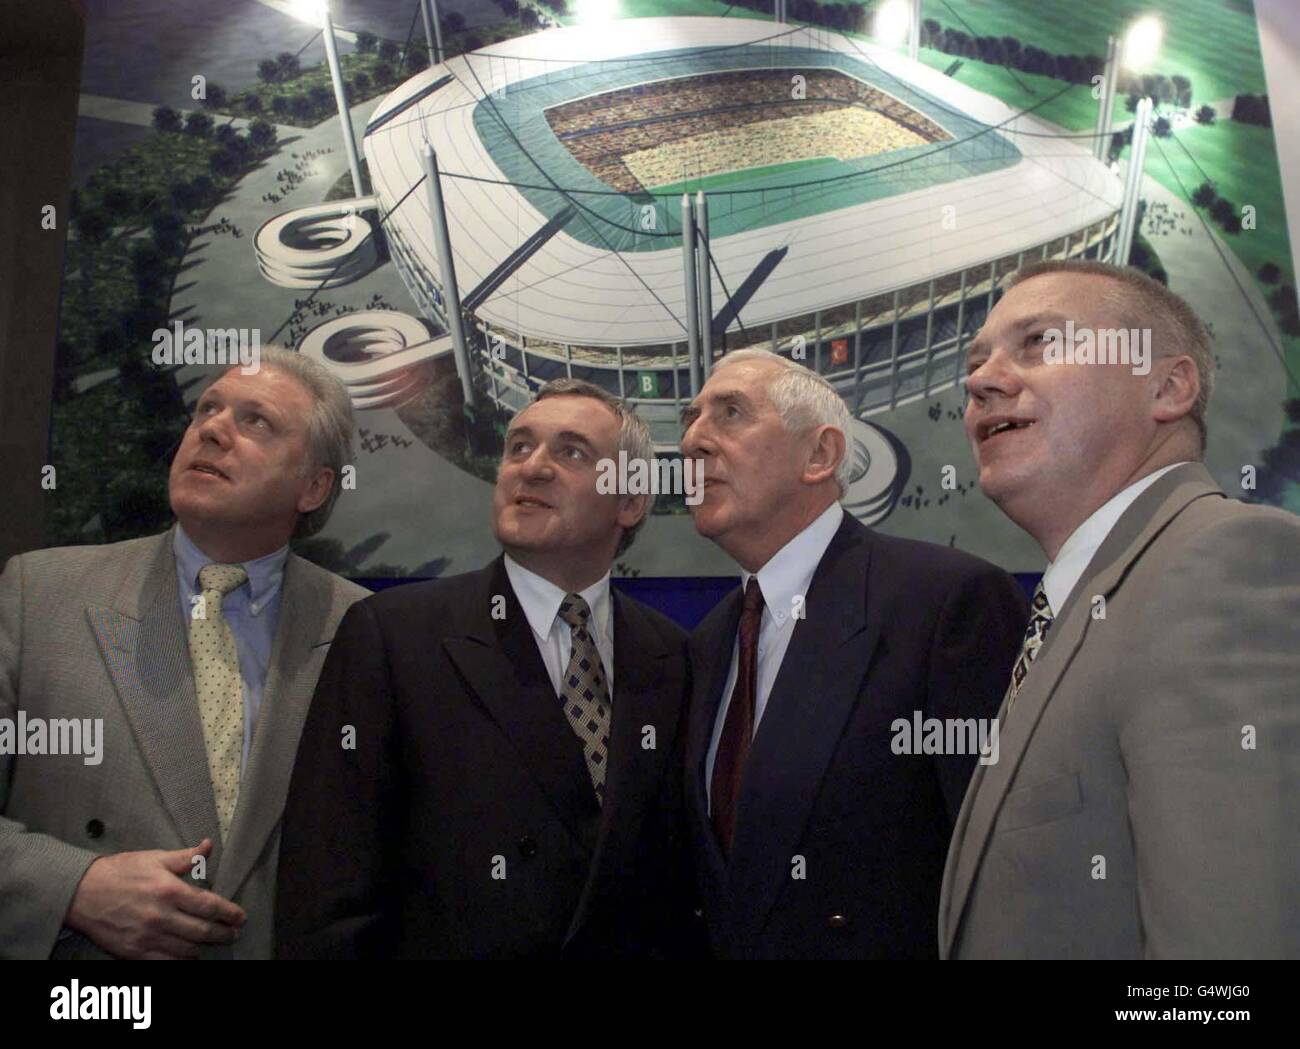 Taoiseach Bertie Ahern (2nd left) with famous Irish sports personalities at the Government announcement of a new 80,000 seater National Sports Stadium in Dublin. (From left) Fergas Slattery, former Irish Rugby International, Bertie Ahern, Ronnie Delany Olympic Champion in 1956, and Paidi O'Se, former All Ireland medal winner, Stock Photo